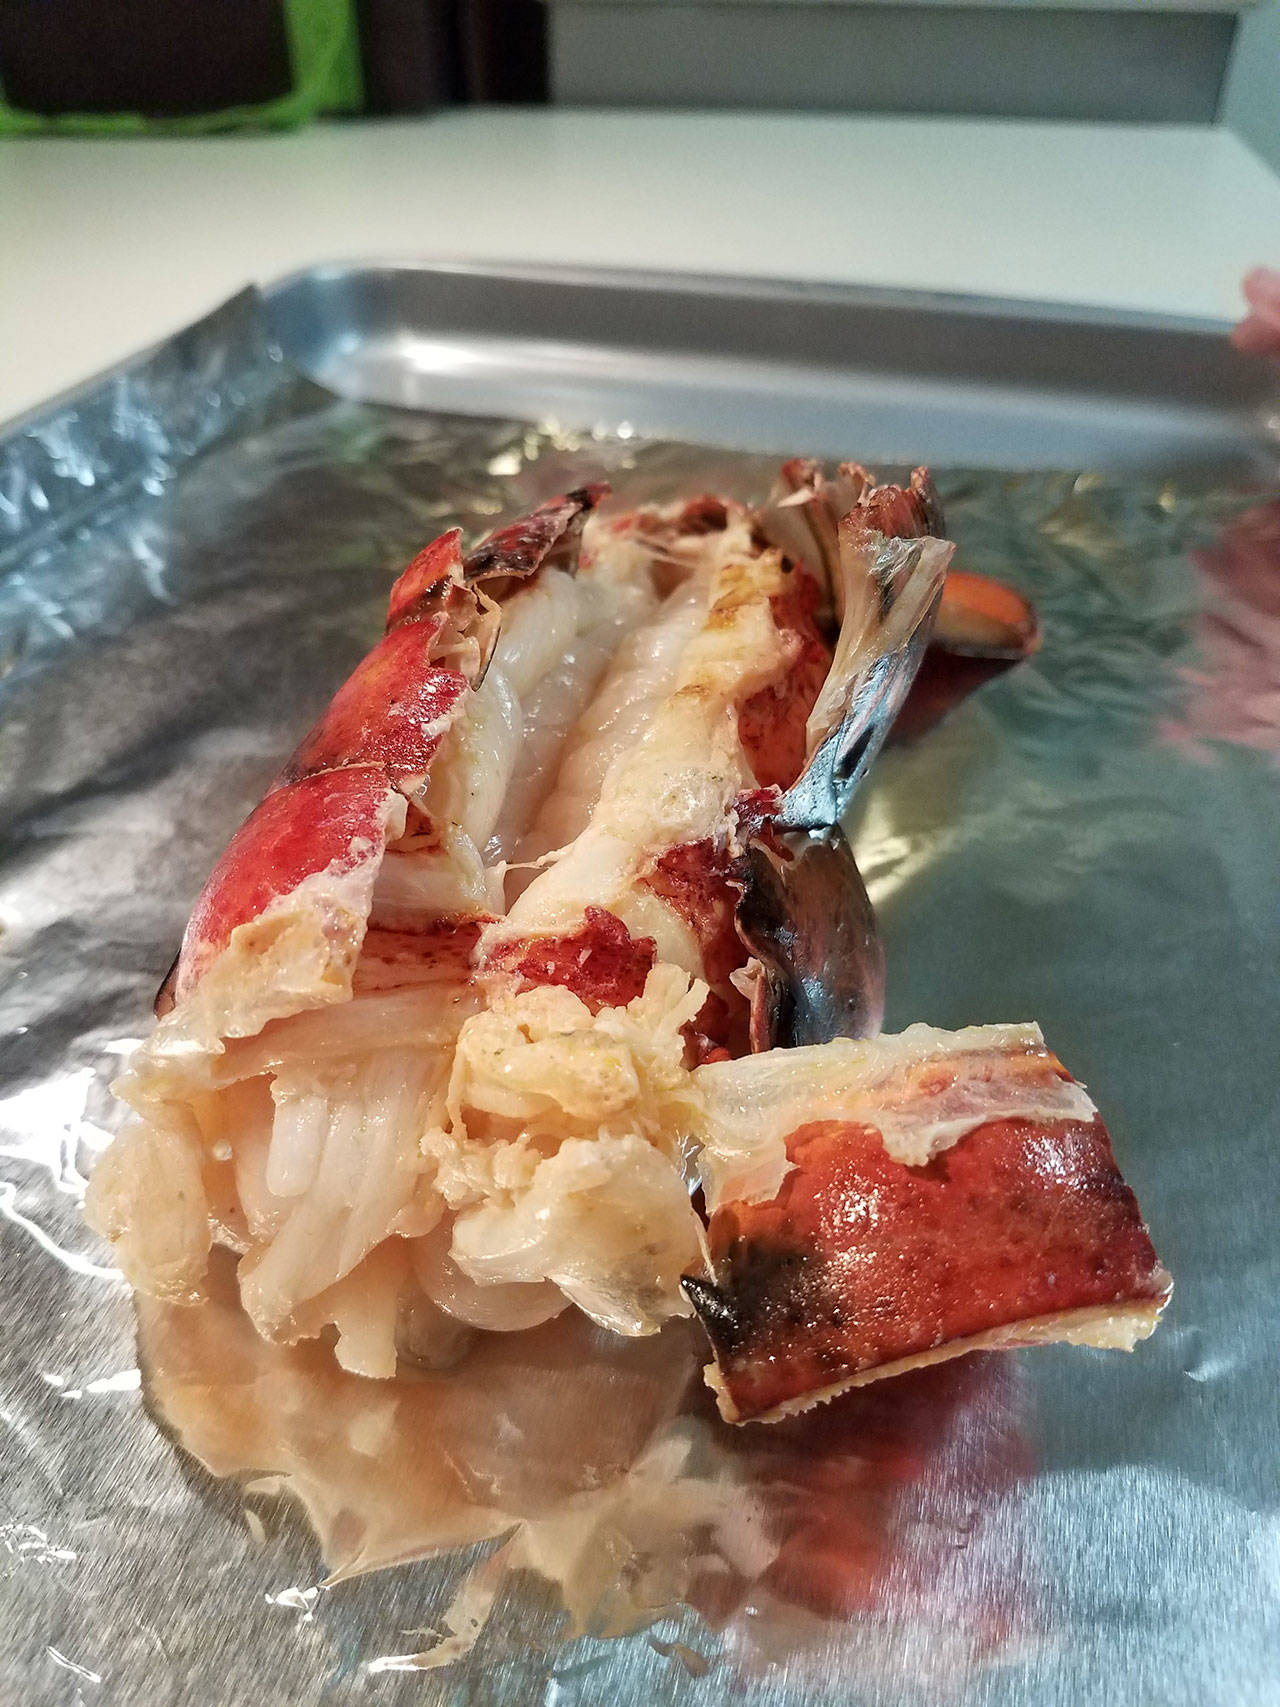 Now done, a grilled lobster tail awaits its fate. (Emily Hanson/Peninsula Daily News)